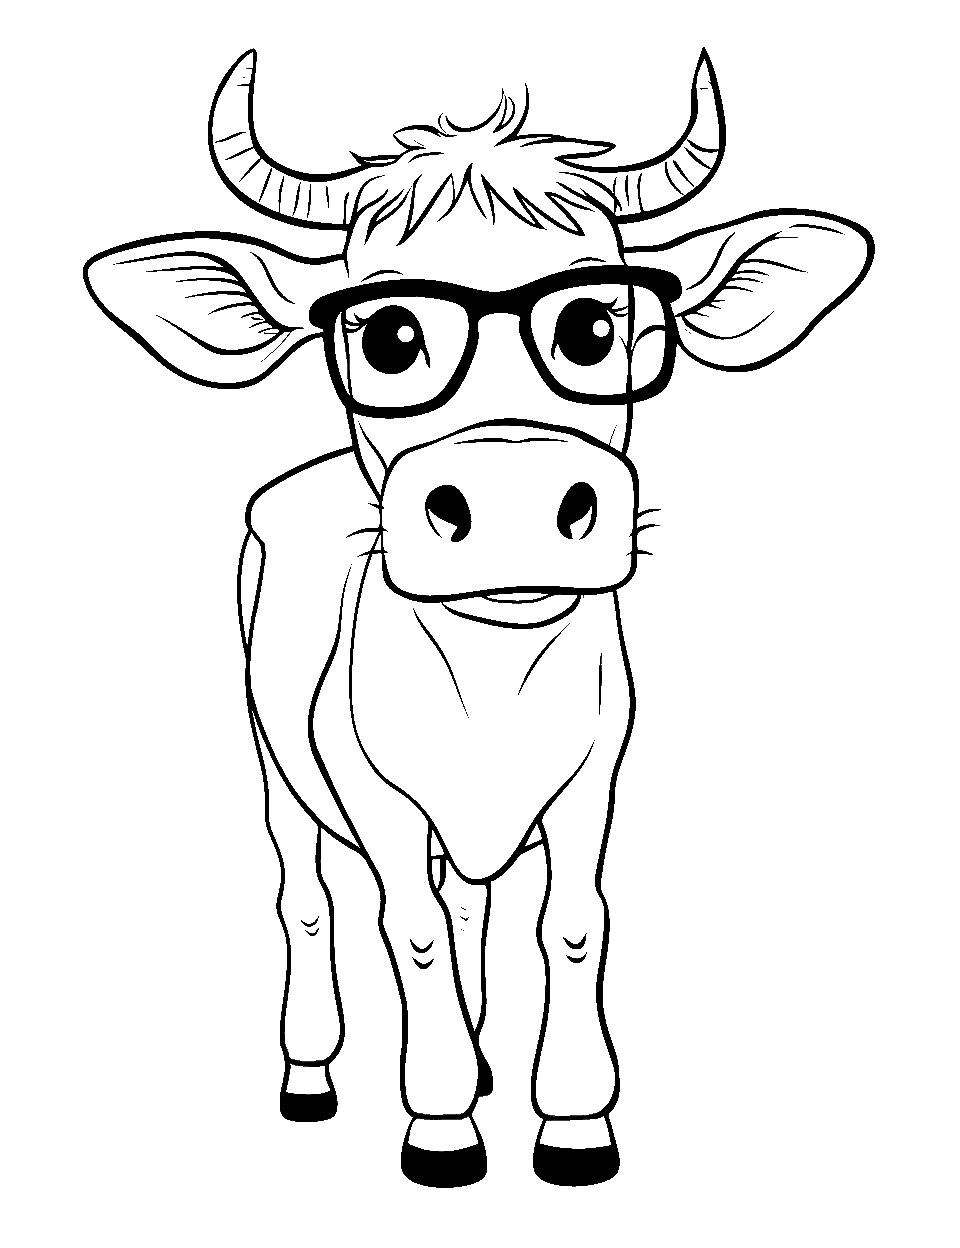 Cow with Glasses Coloring Page - A cow wearing glasses and looking like it knows what’s going on.